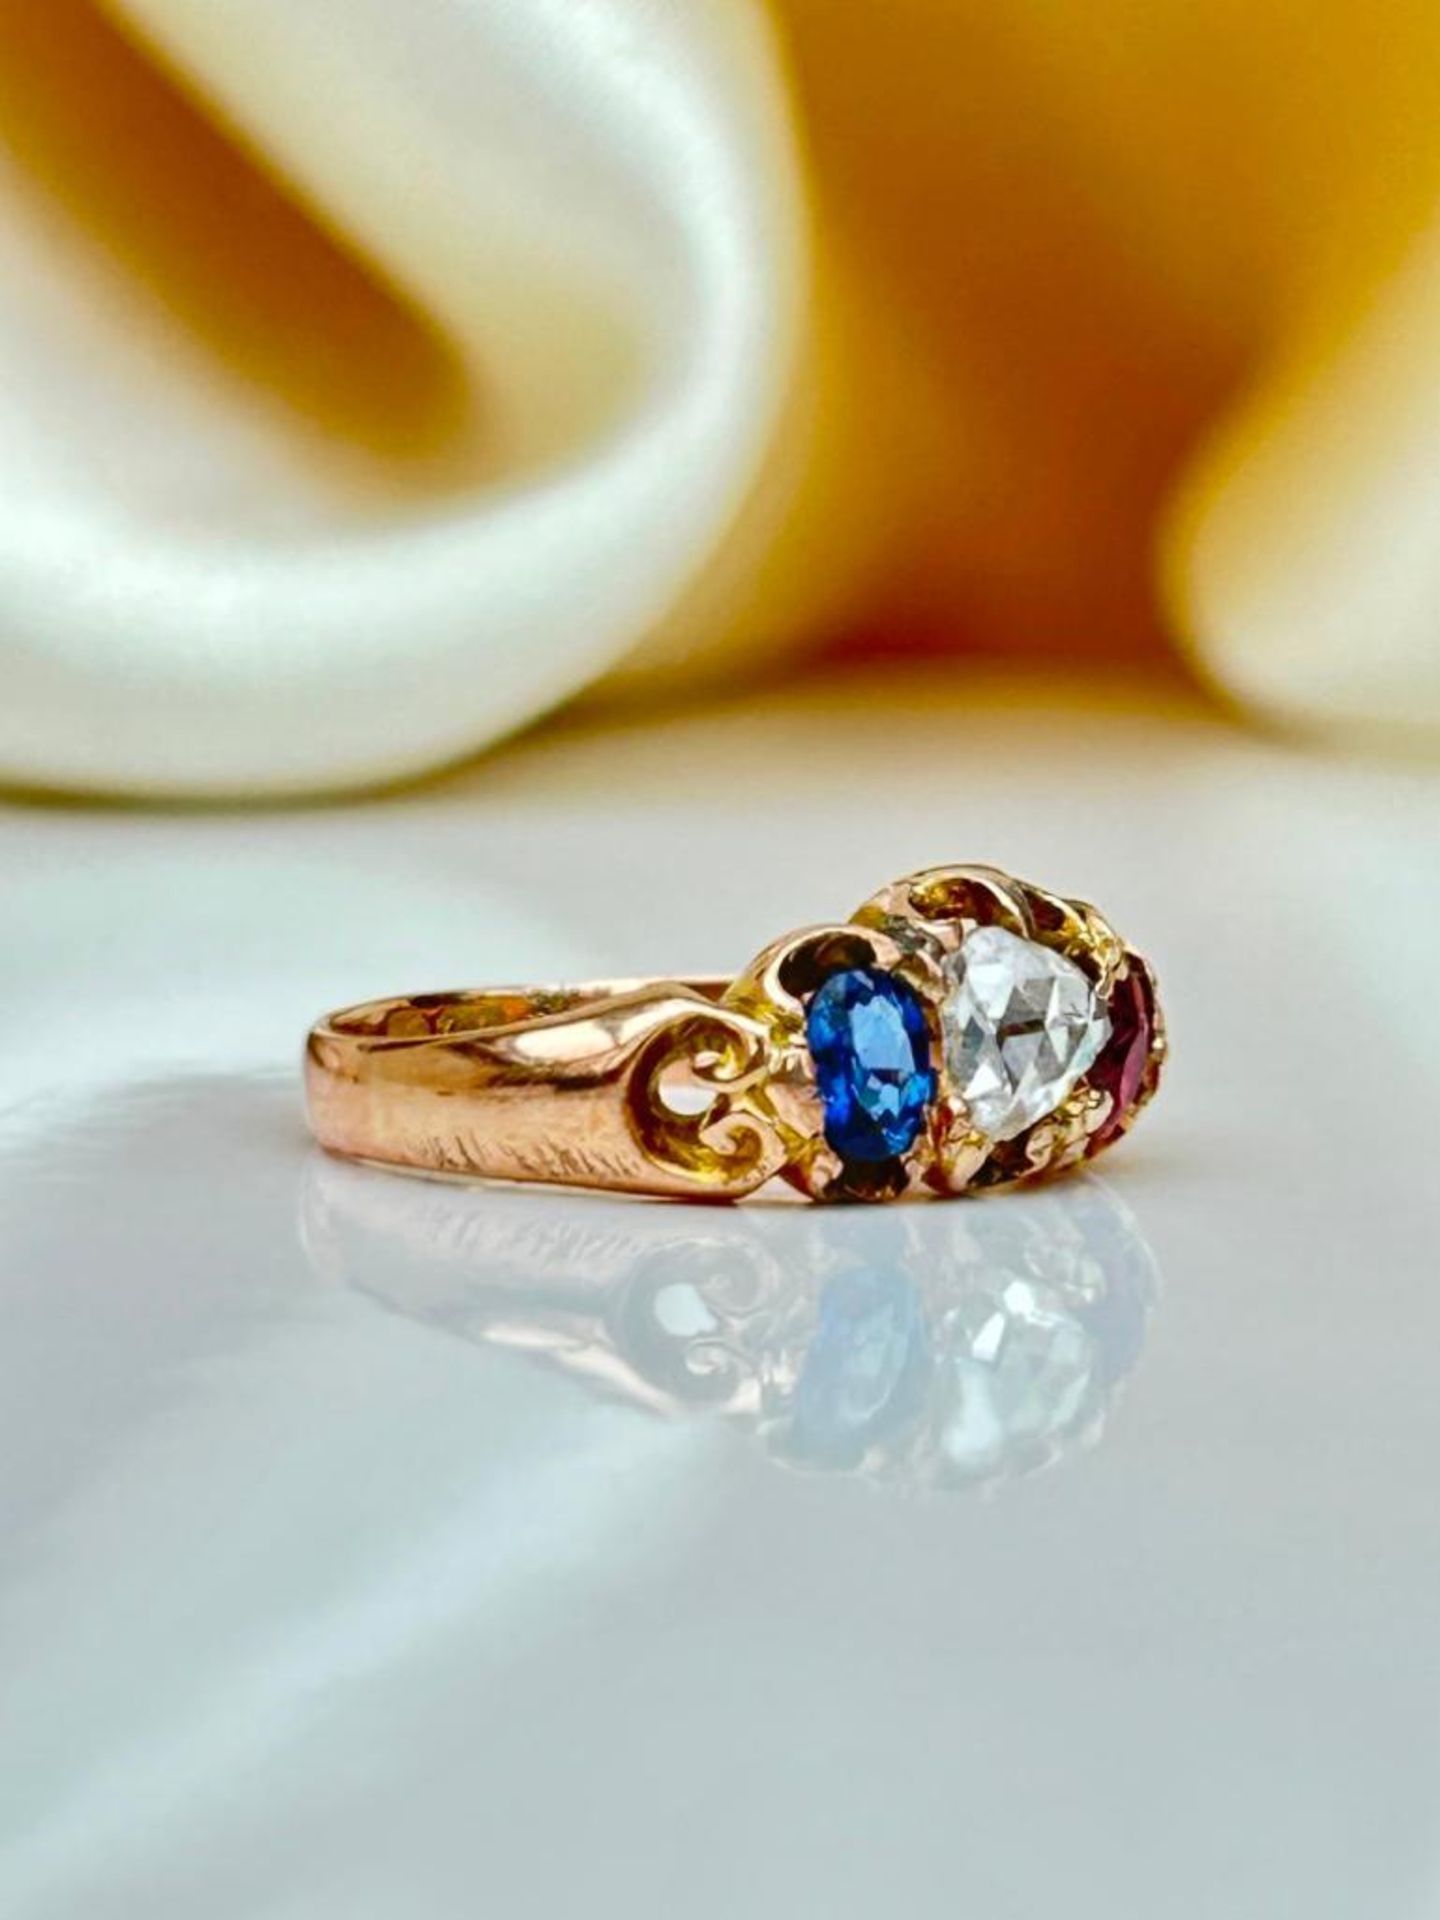 Antique Ruby, Sapphire and Diamond Gold Ring - Image 2 of 8